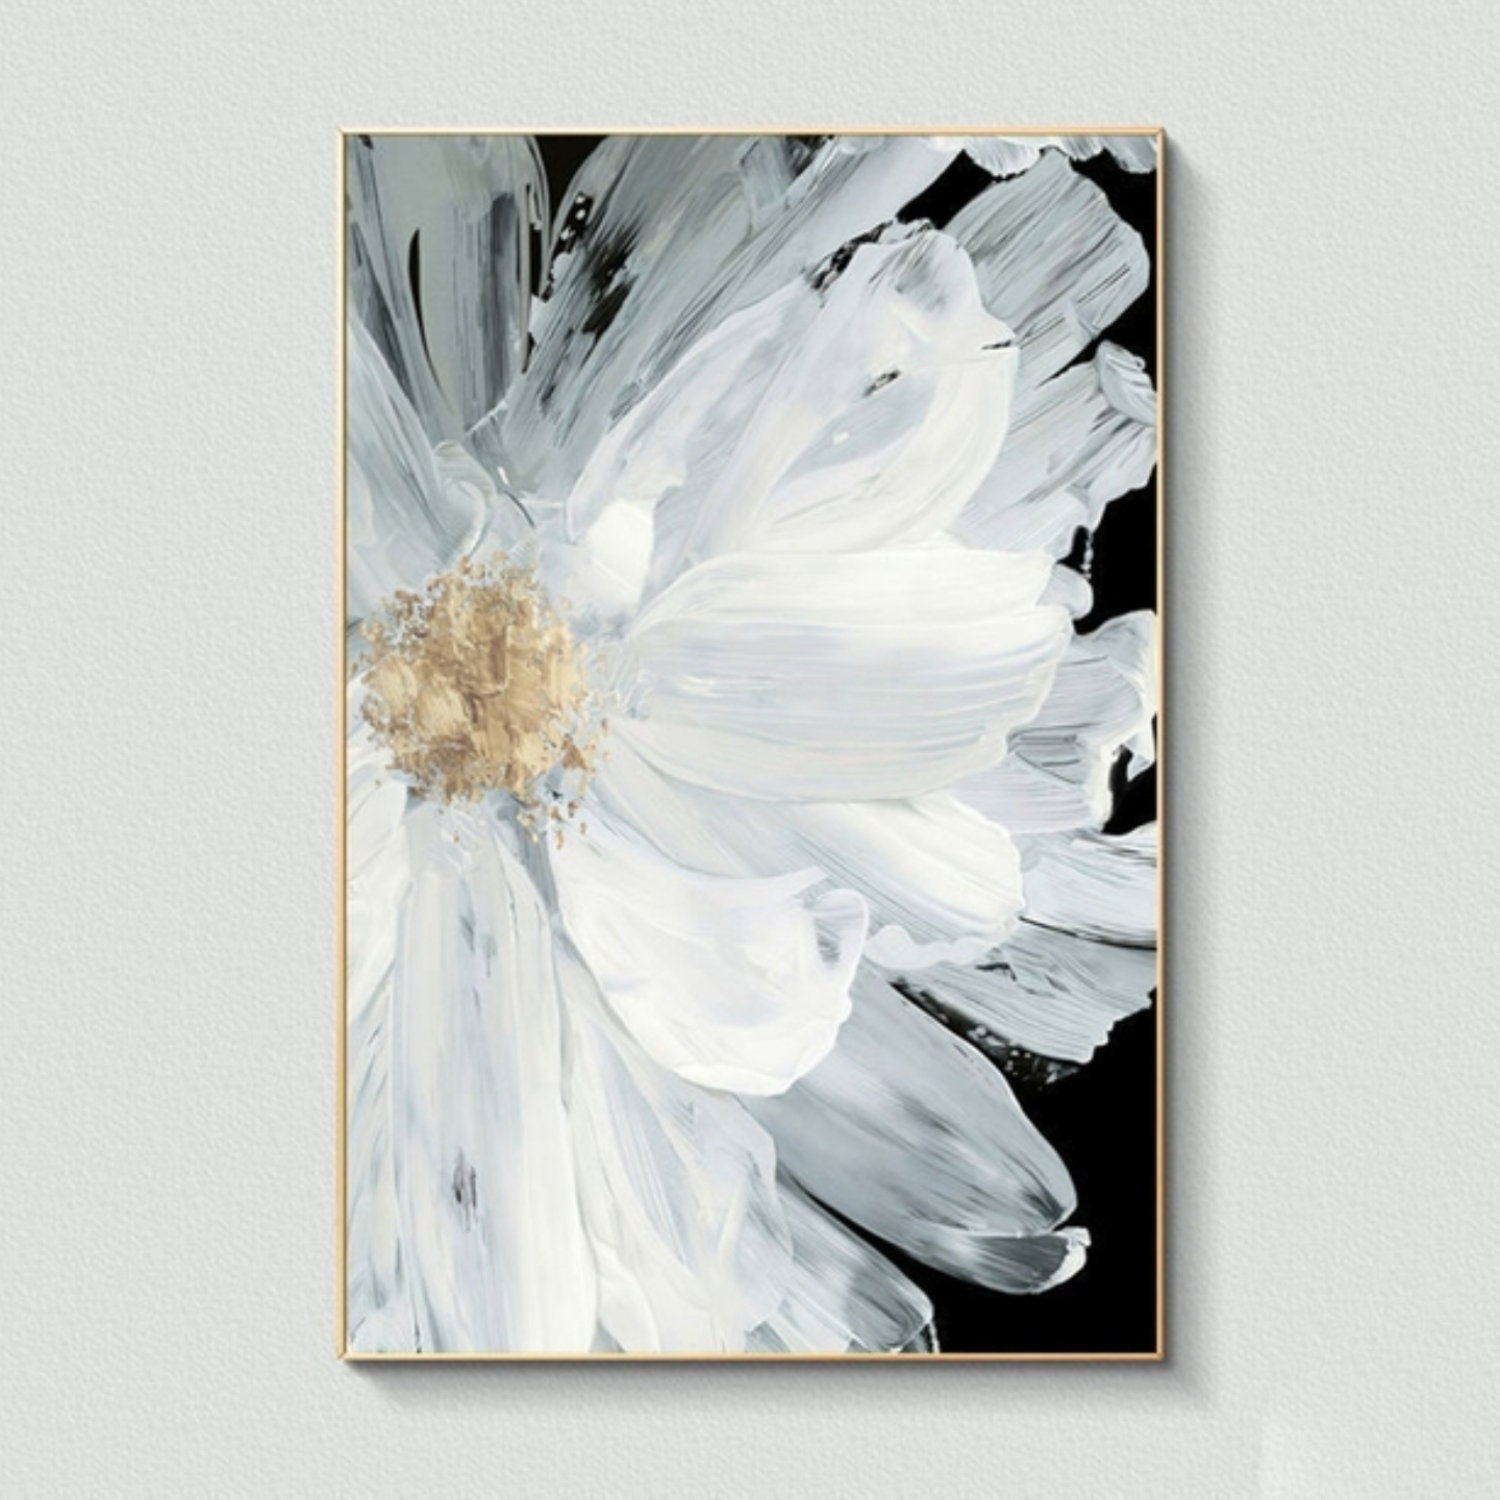 Charming White Flower Petals 100% Hand Painted Art